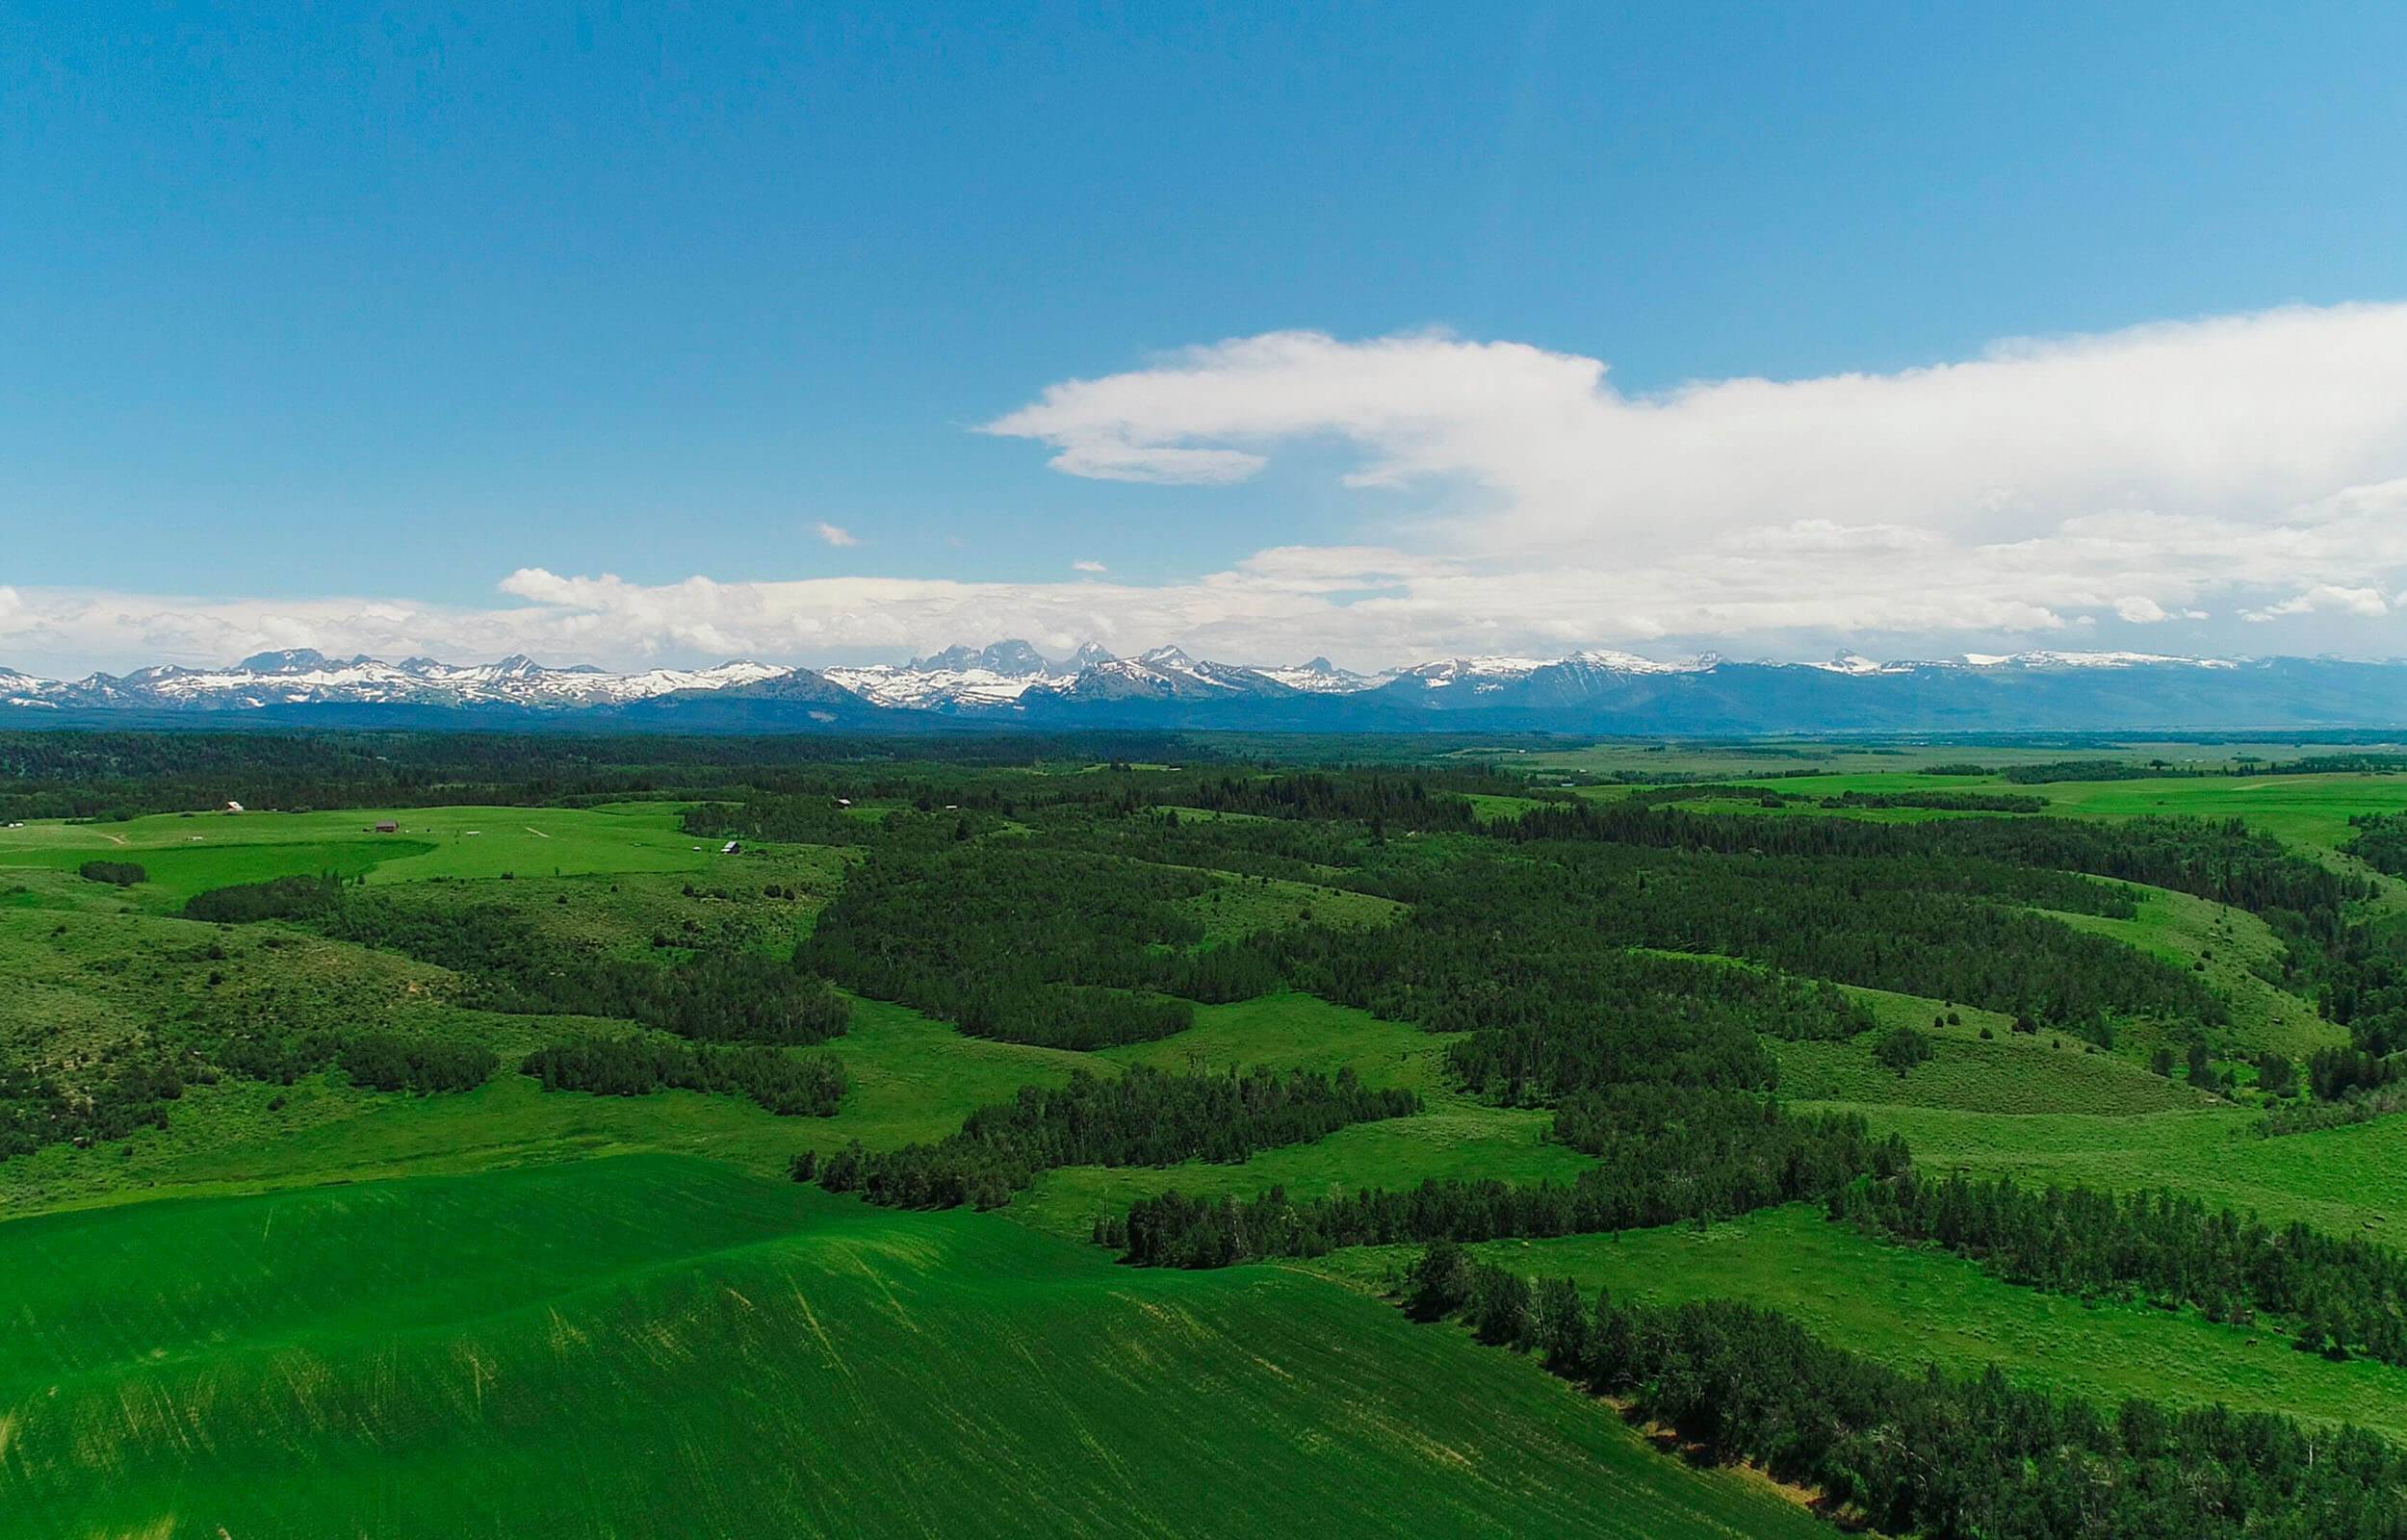 Aerial view of rolling green hills in the Teton Valley.